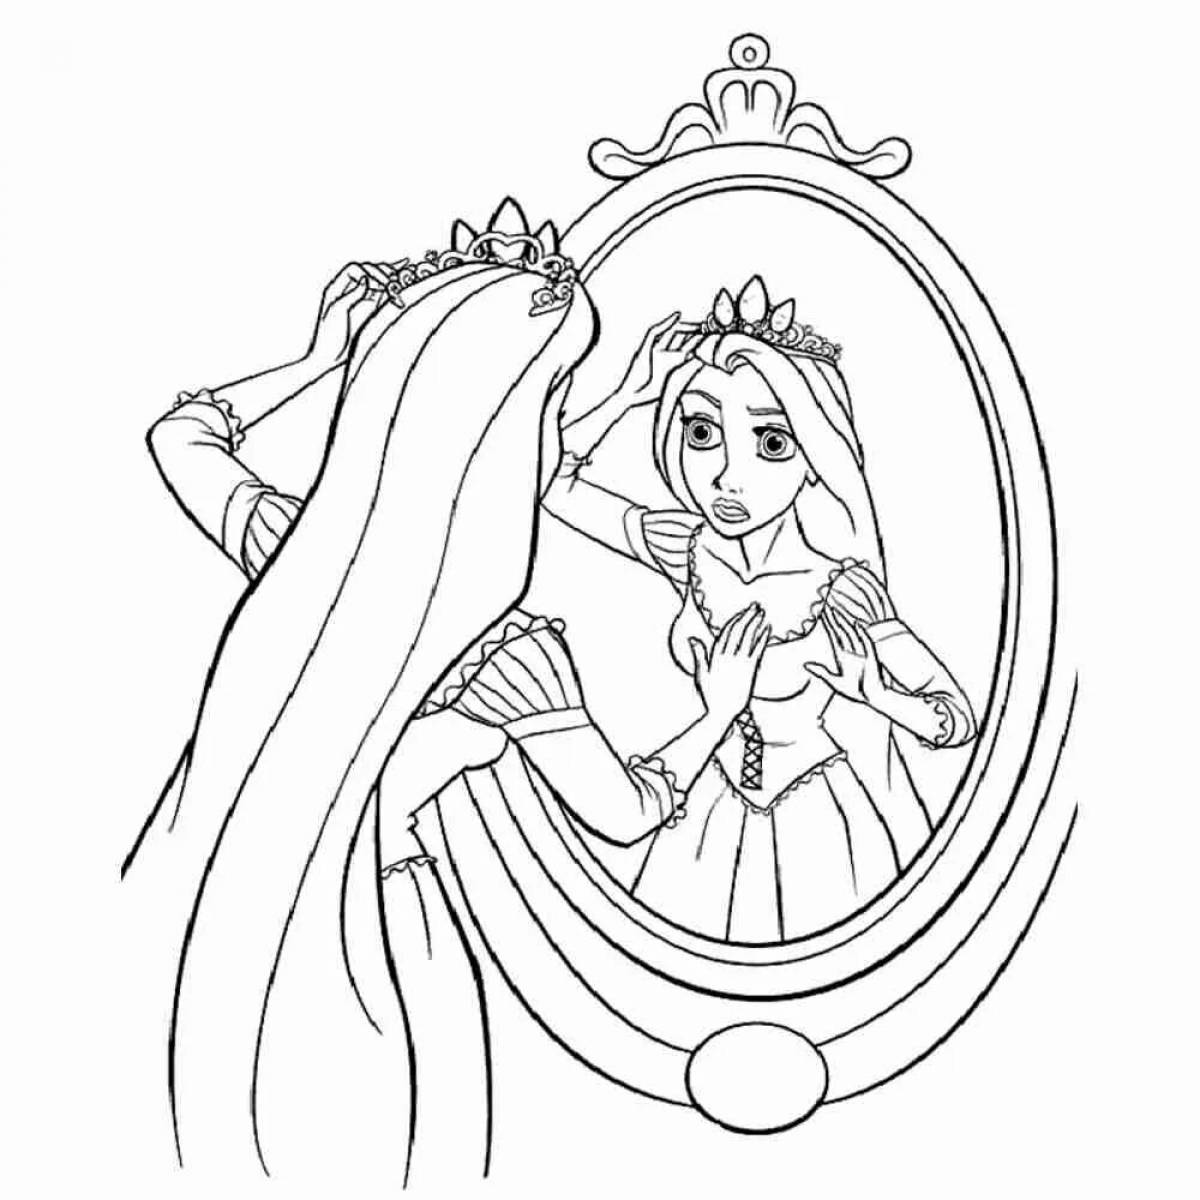 Spicy little rapunzel coloring book